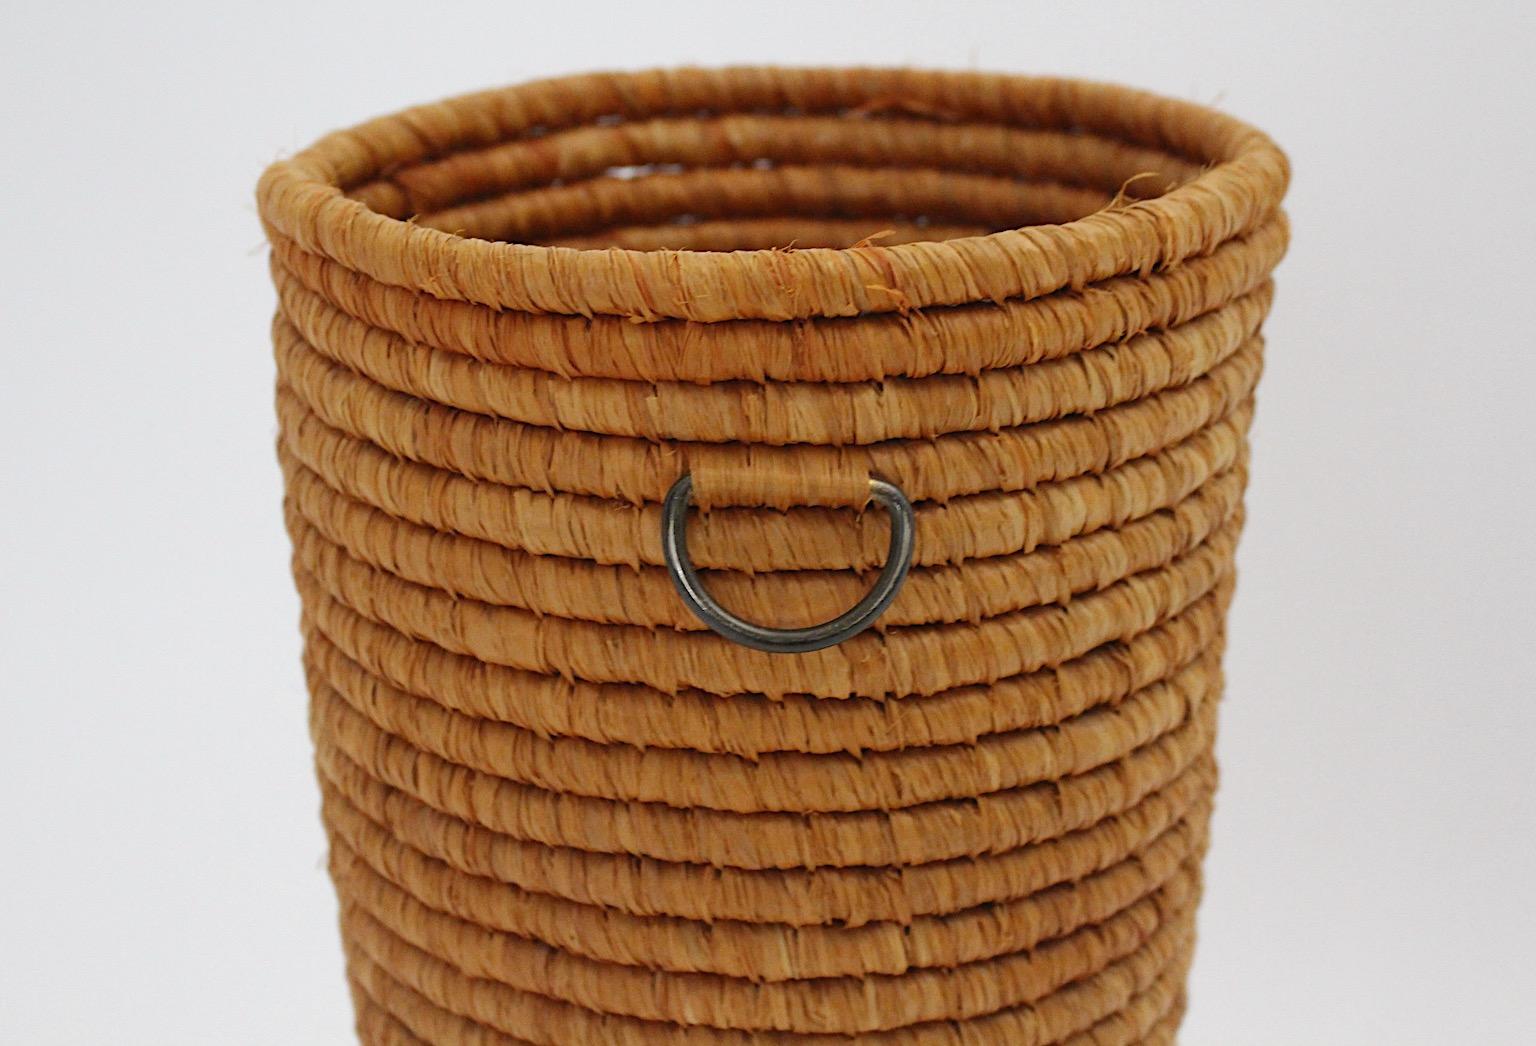 Mid-Century Modern vintage brown raffia and brass paper basket, or basket, which was designed and hand made, 1950s, Vienna, Austria.
The natural raffia network in a warm earthen tone and 2 brass handles on each side underlines the rustic look.
The